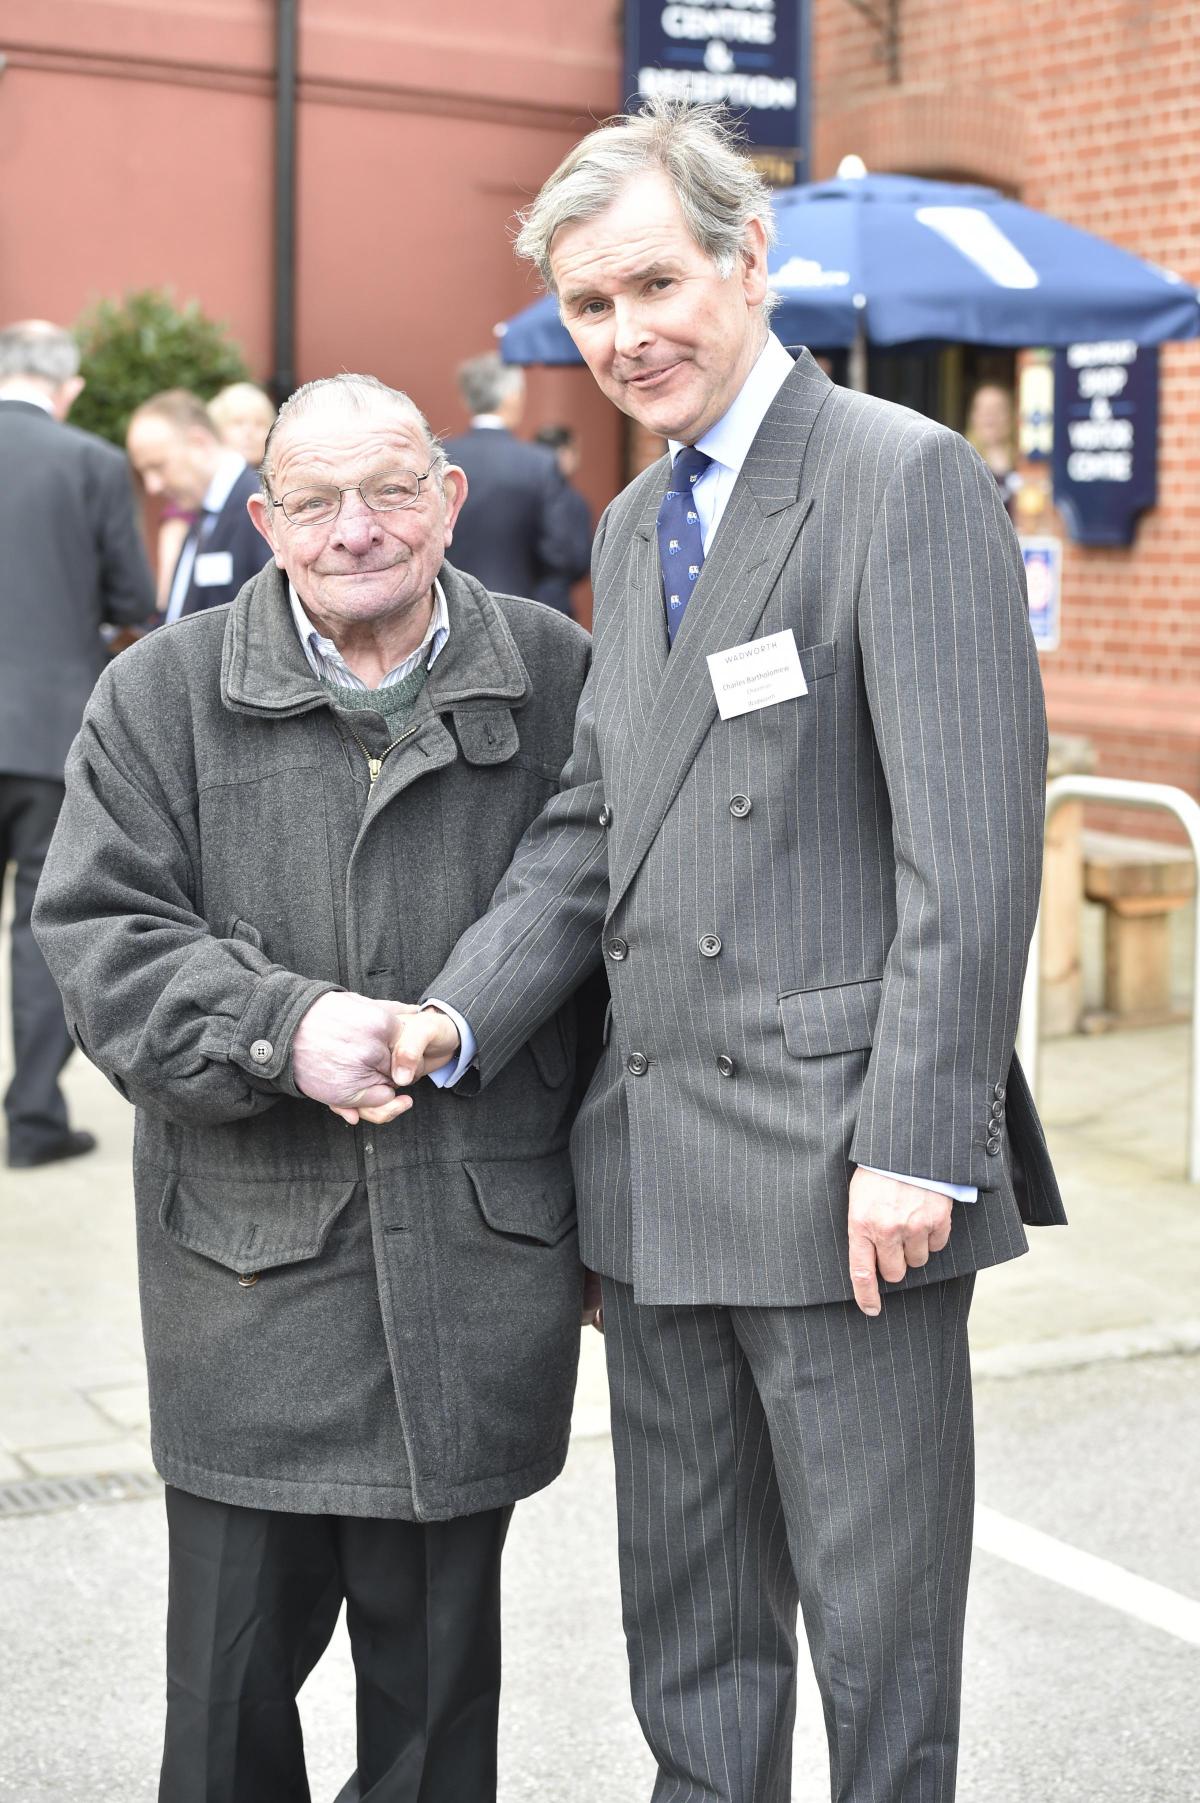 Michael Freeman with Wadworth chairman Charles Bartholomew. Picture by Diane Vose